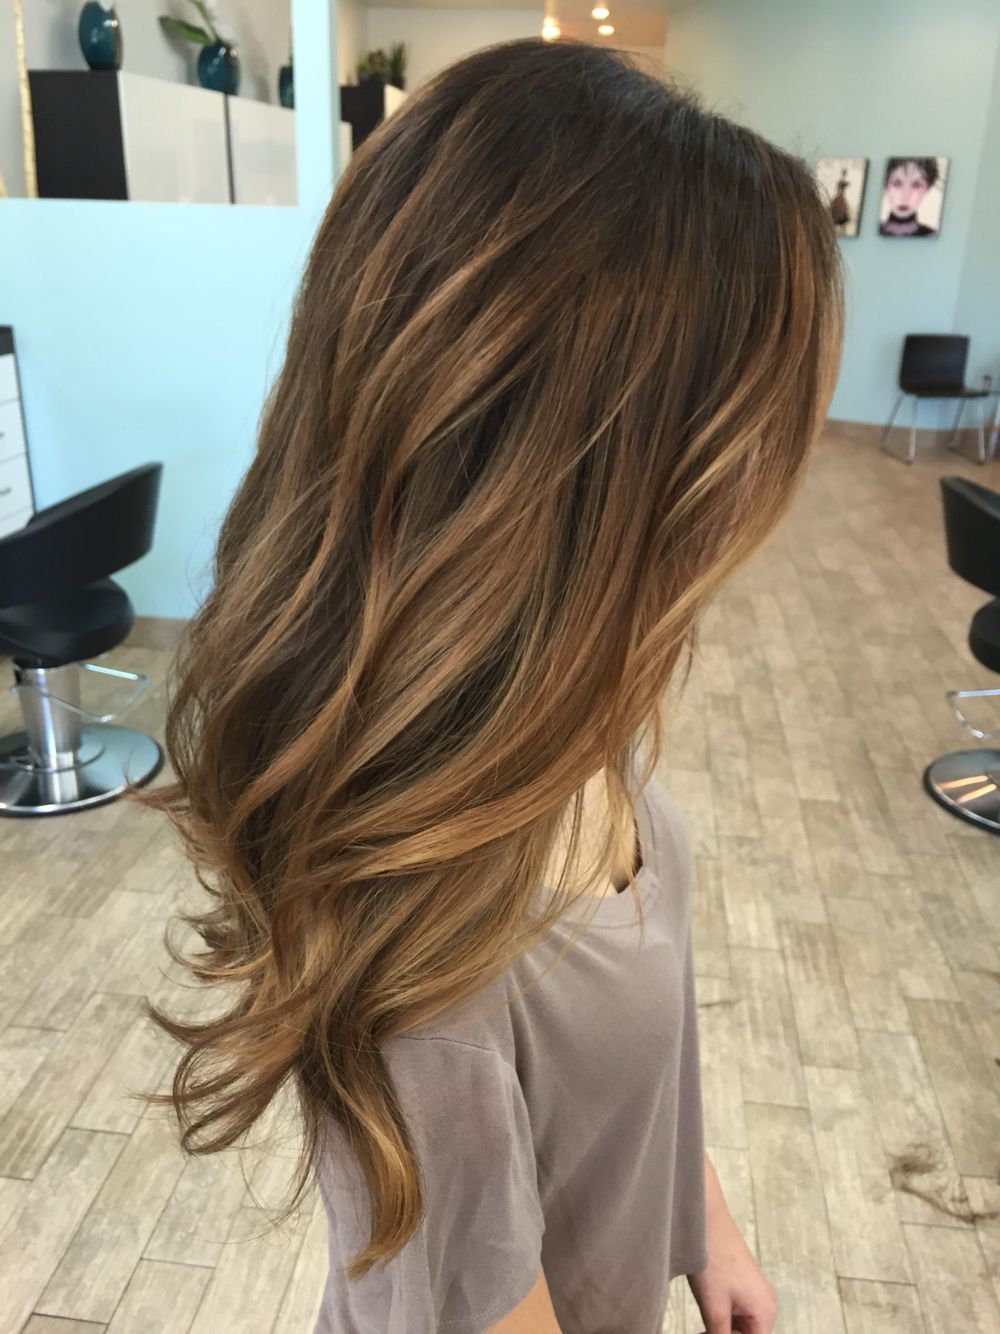 Brown balayage done by Roxy at Rowdy Hair